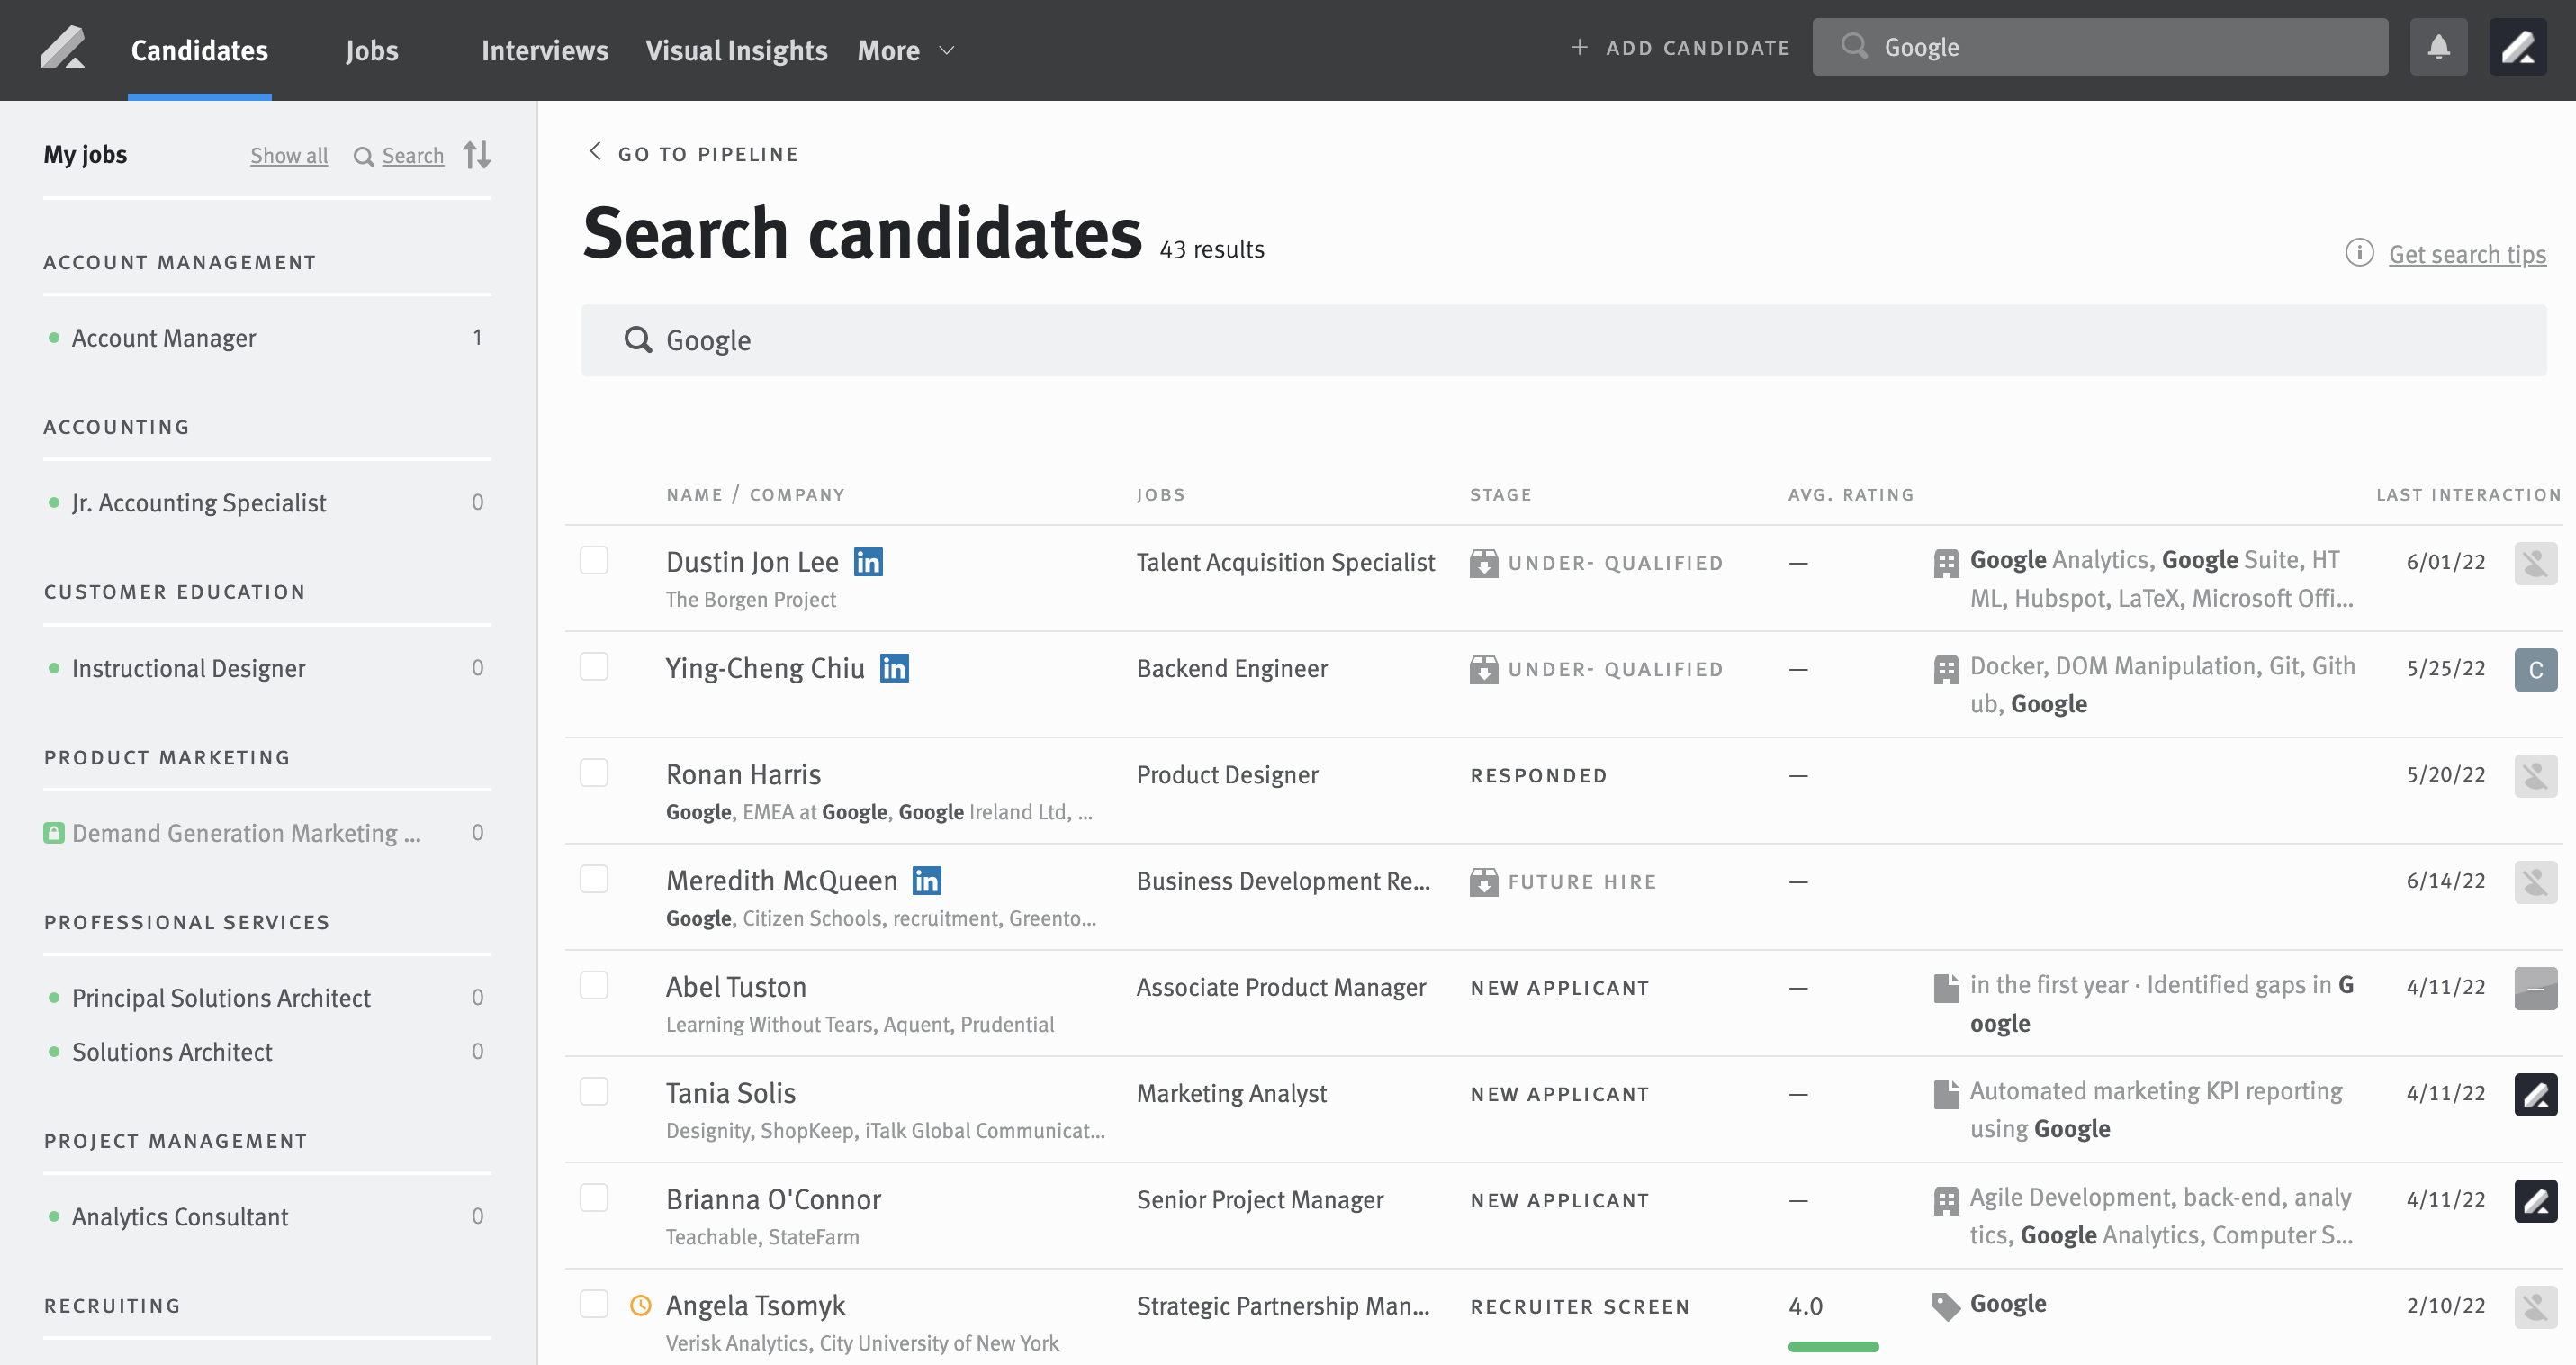 Full candidate search results page